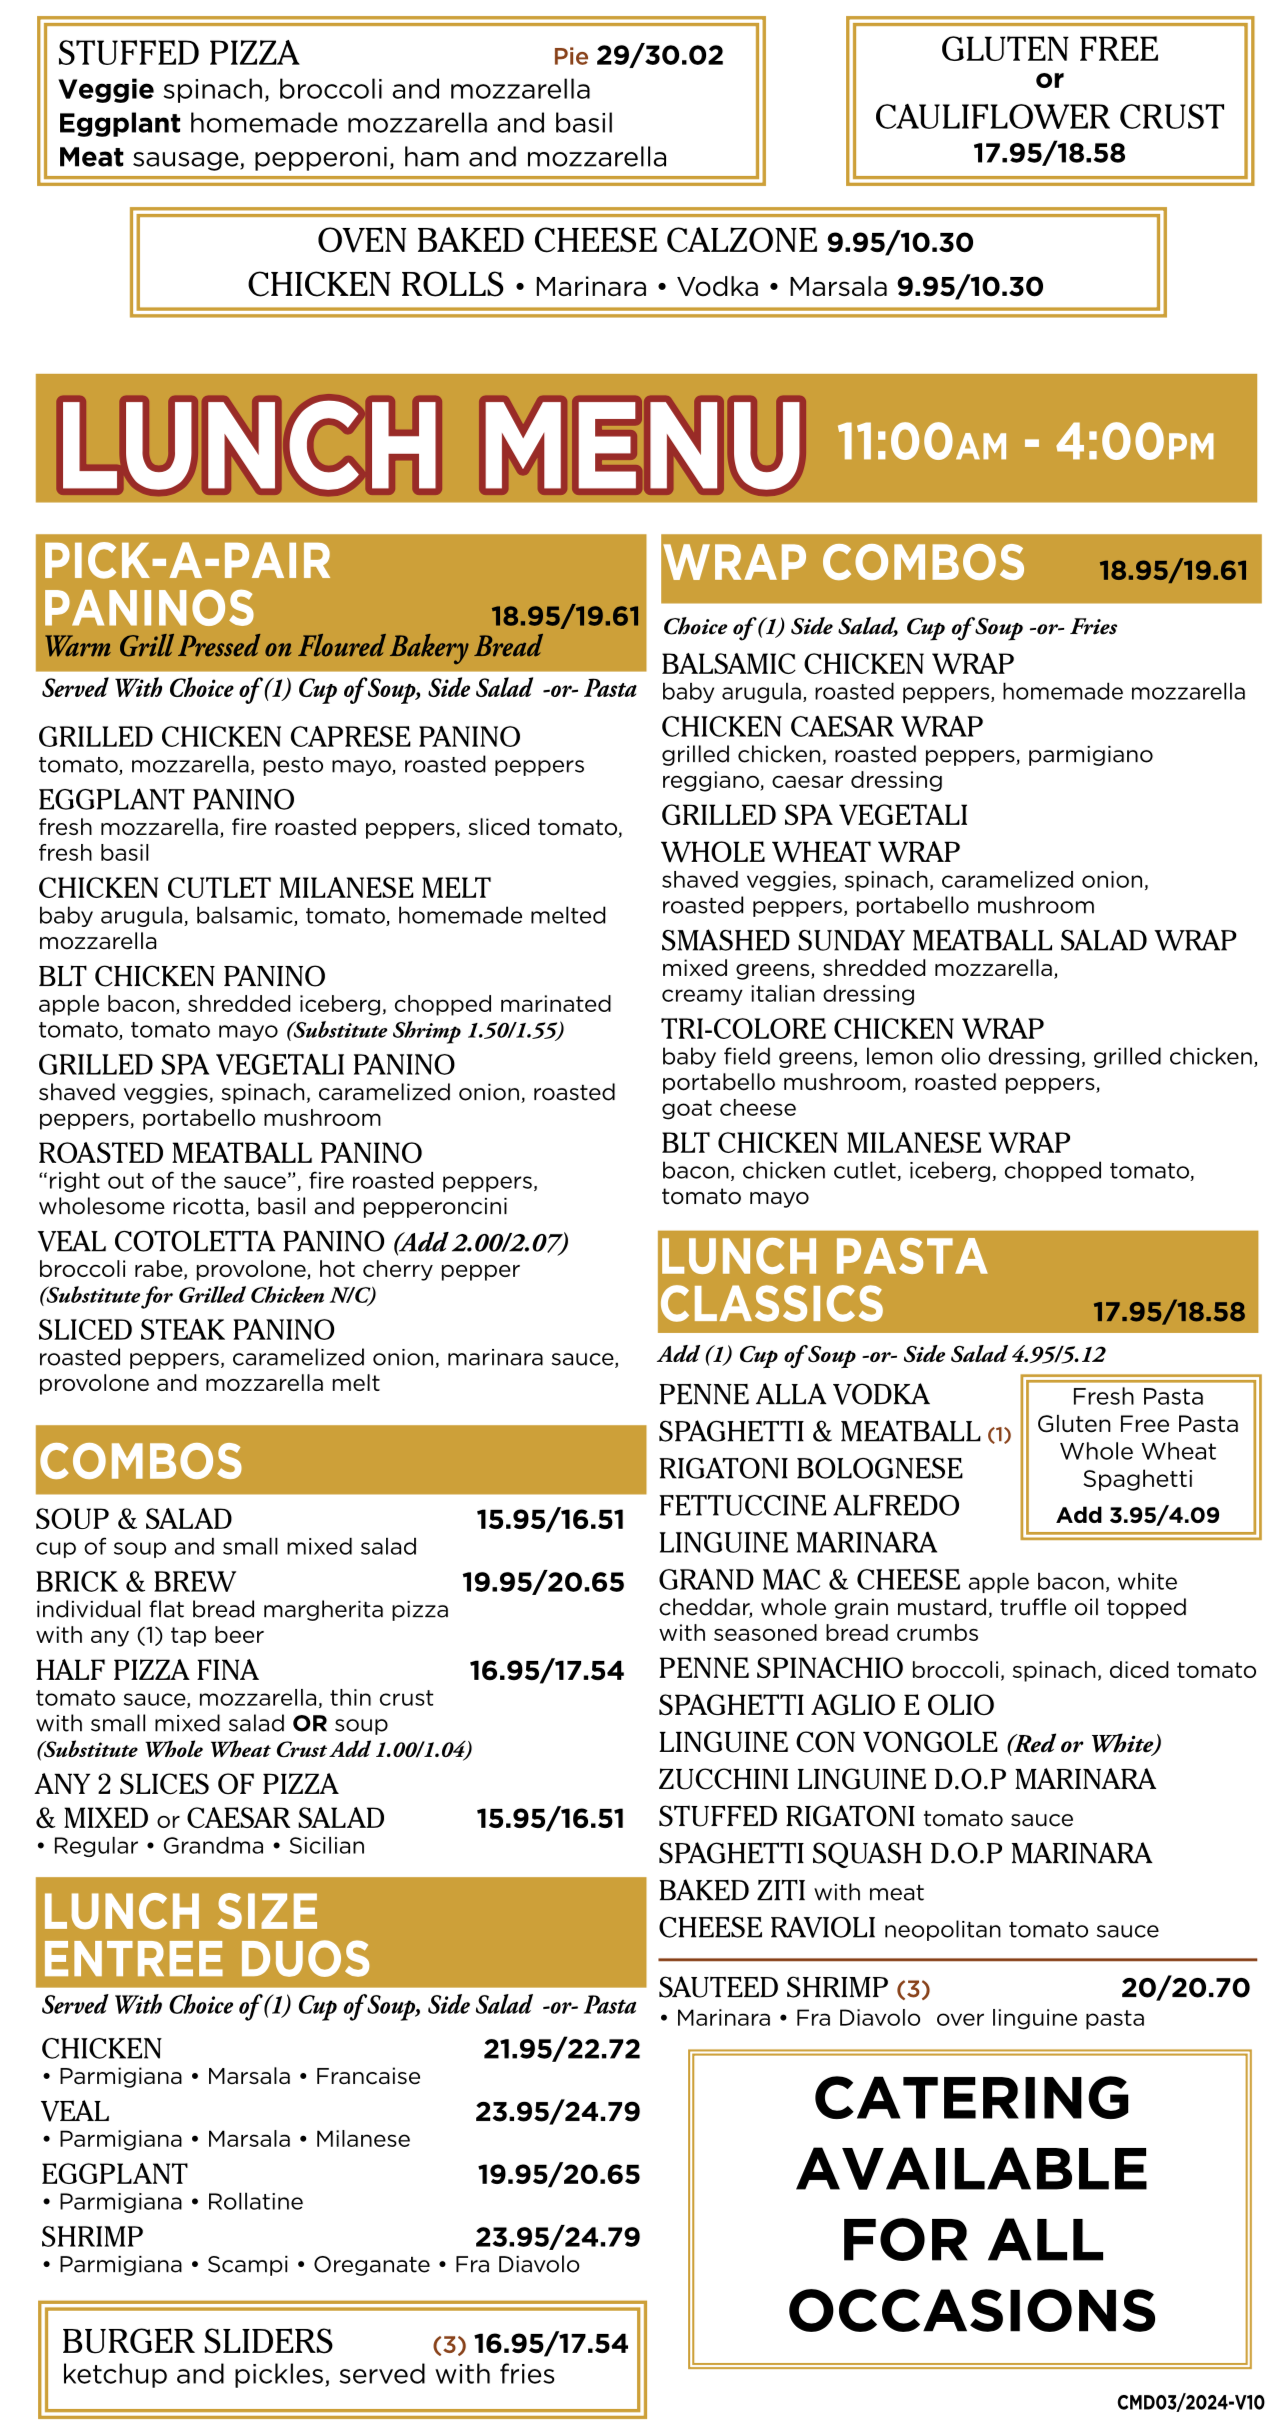 Discounted menu prices